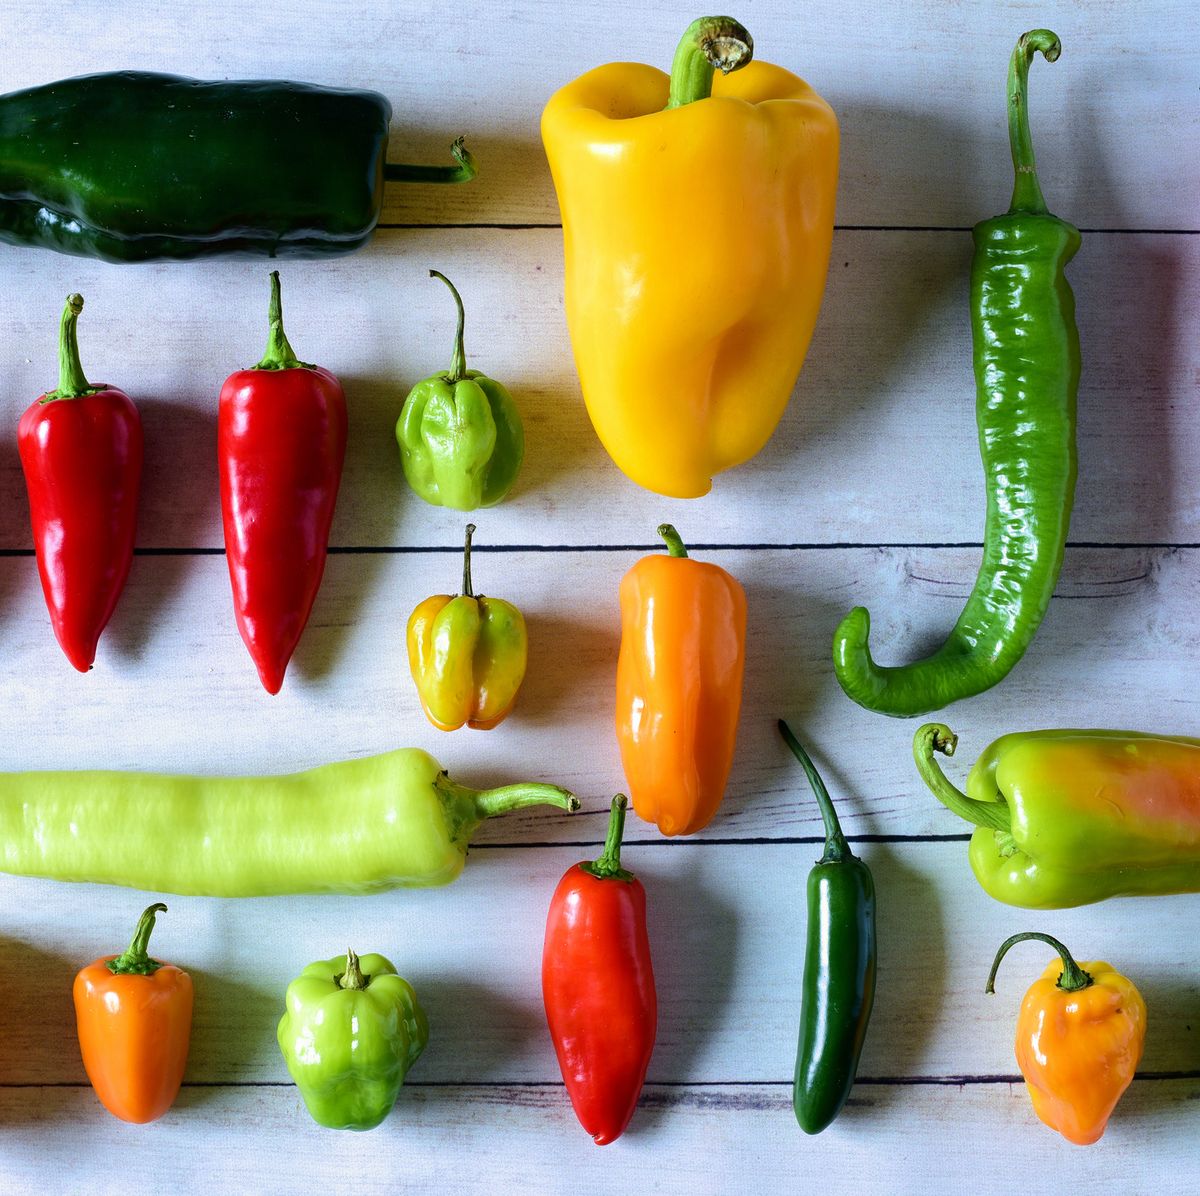 12 Types of Hot Peppers - Guide to Different Hot Peppers